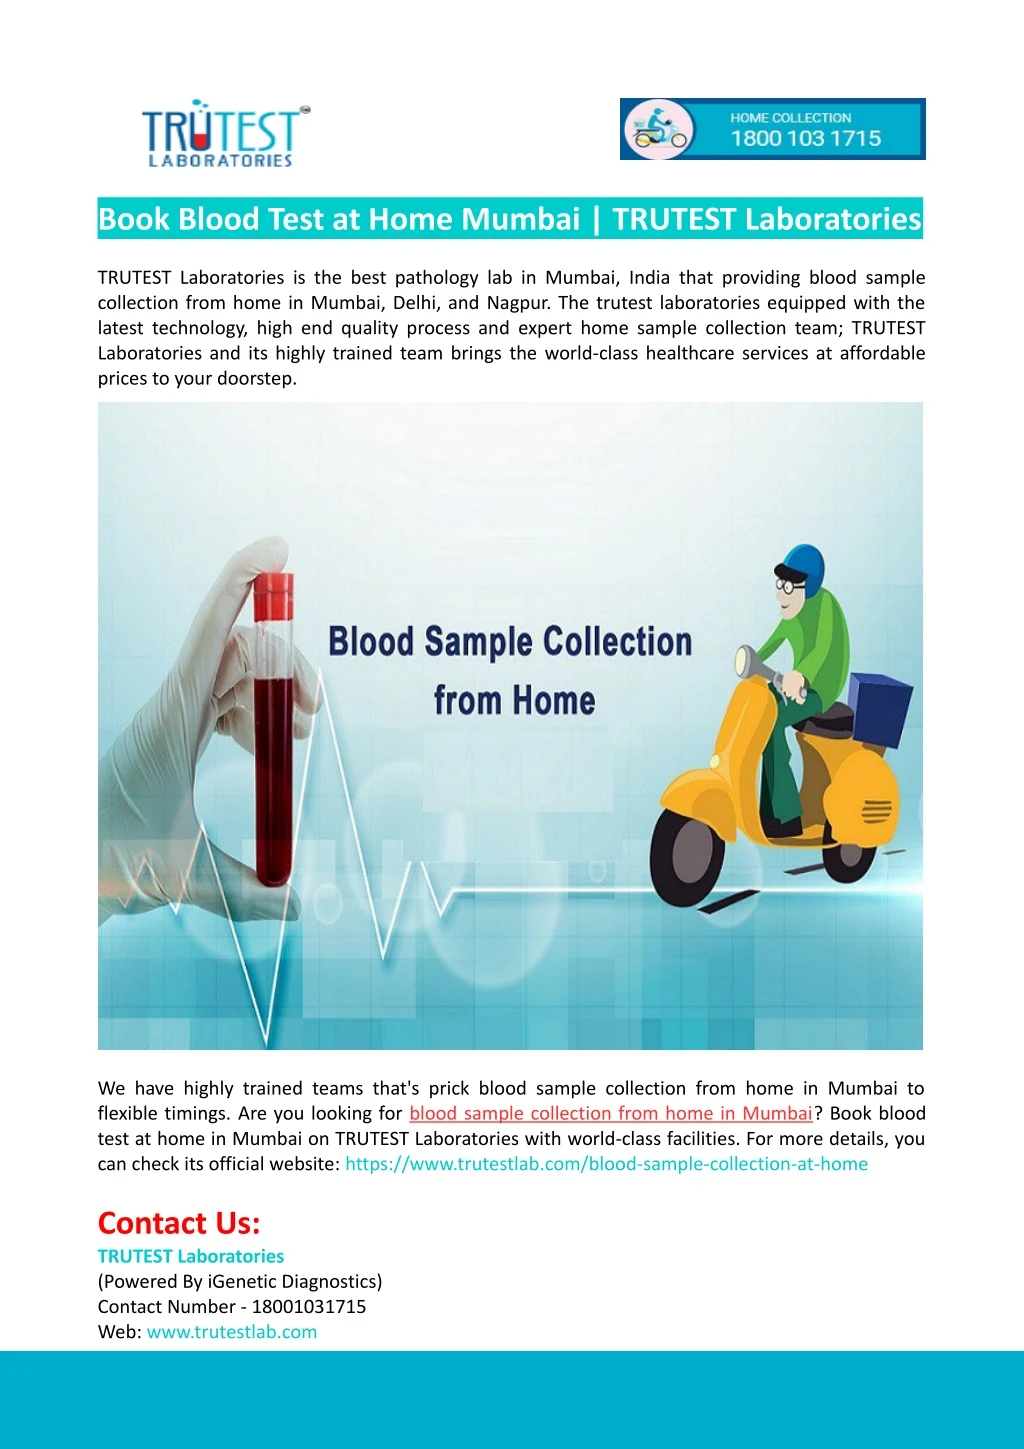 book blood test at home mumbai trutest